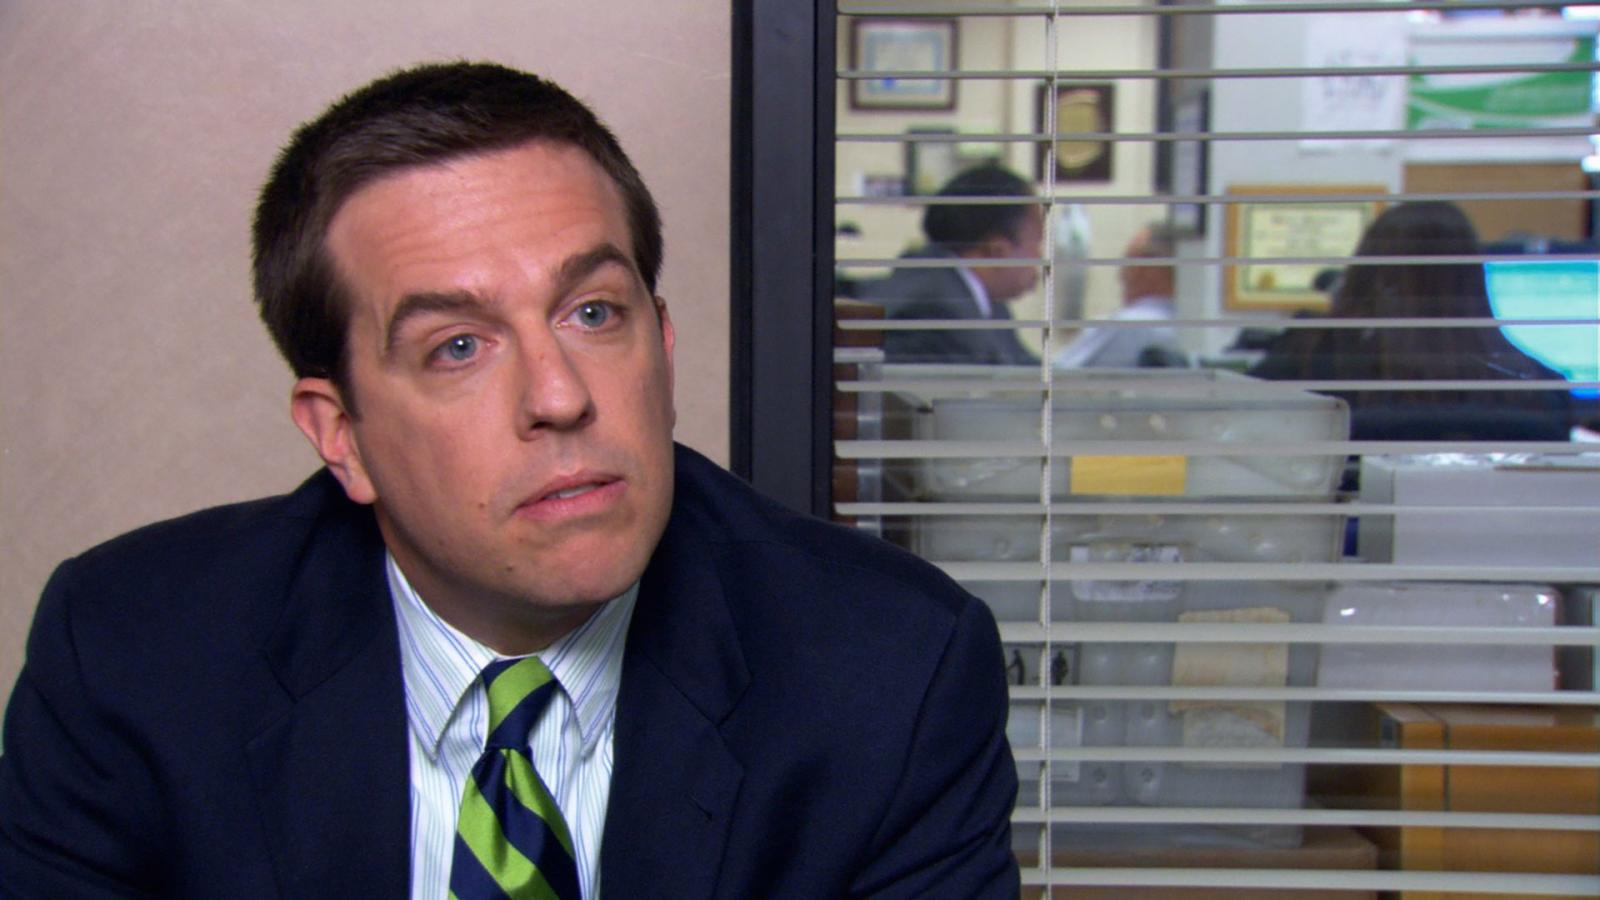 Find Out Which 'The Office' Employee You Are Based on Your Zodiac Sign - image 5